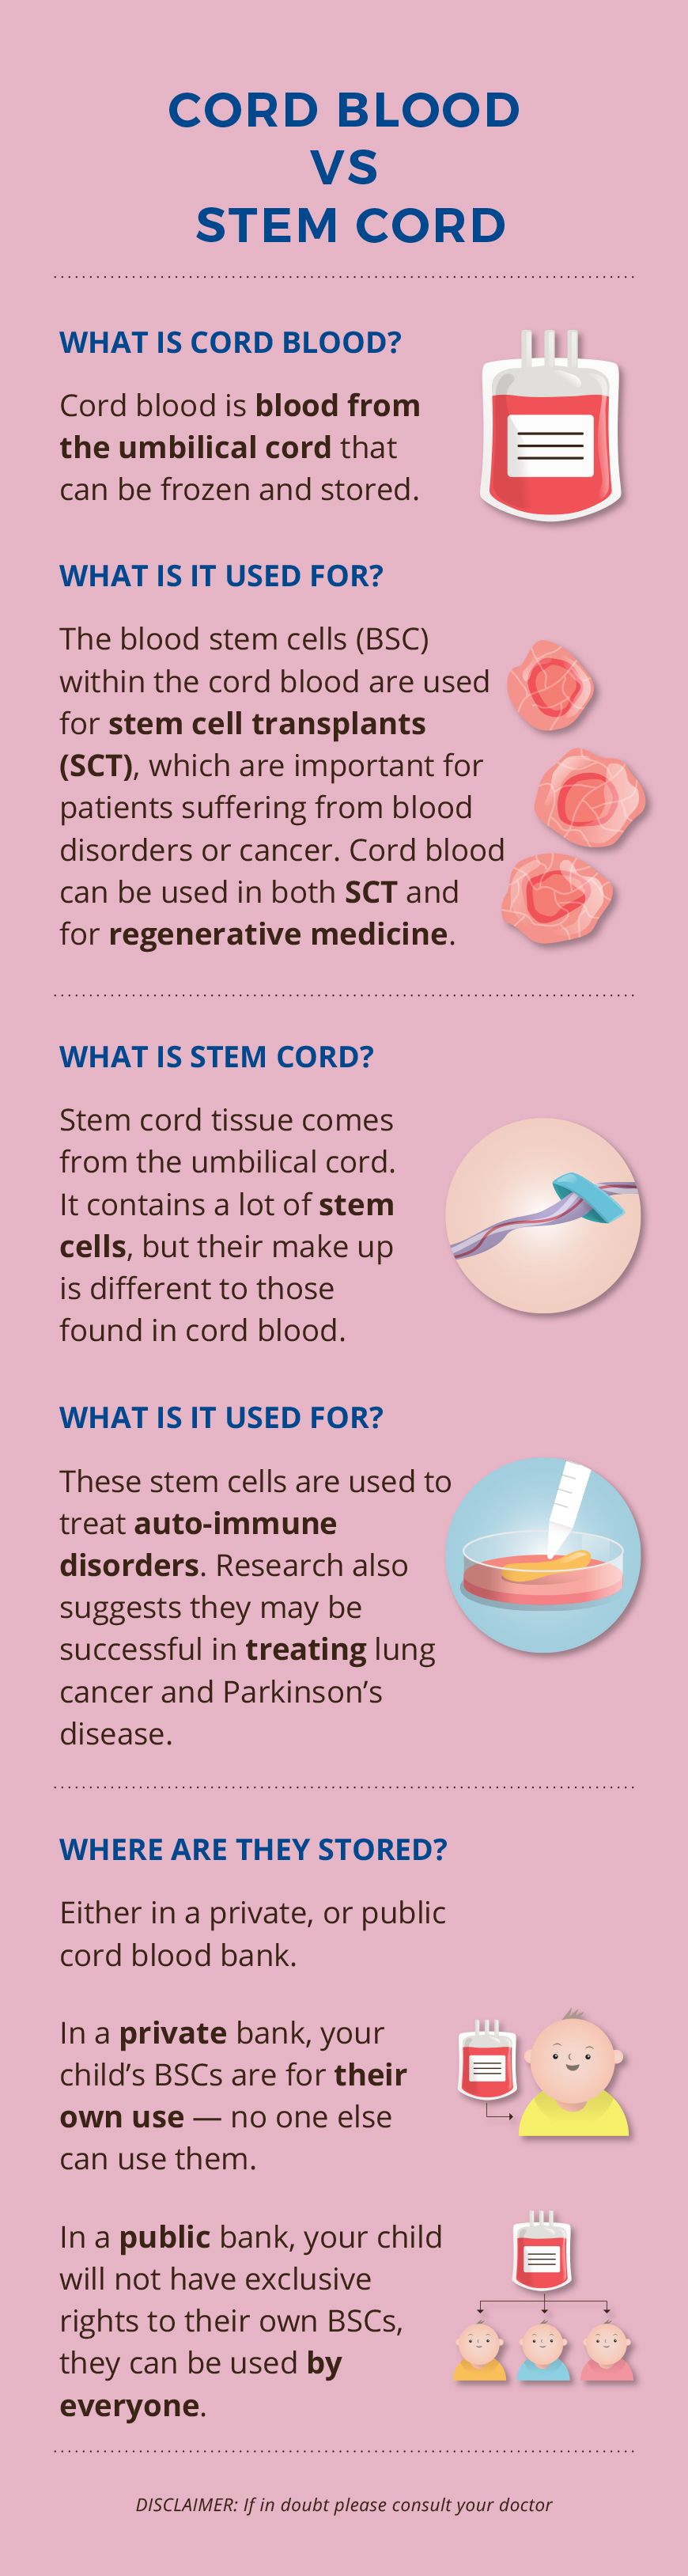 5_Questions_About_Cord_Blood_Banking_INFOGRAPHIC